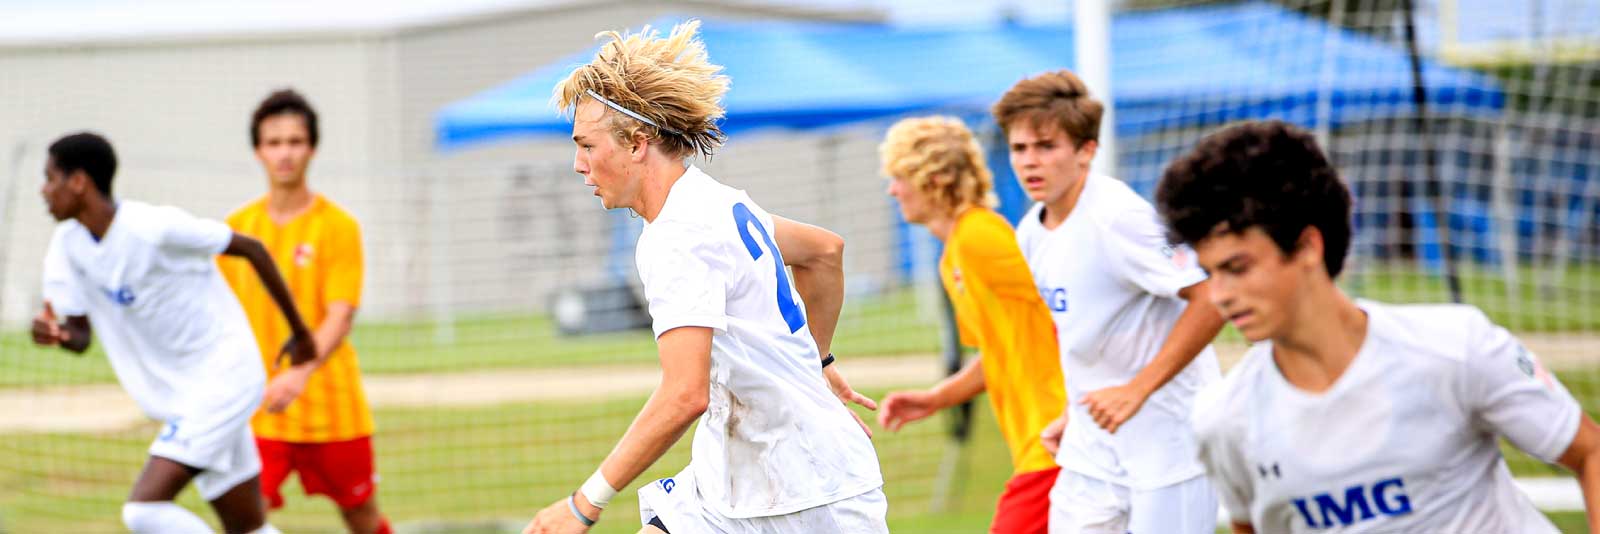 Mens College Soccer Recruiting Guidelines